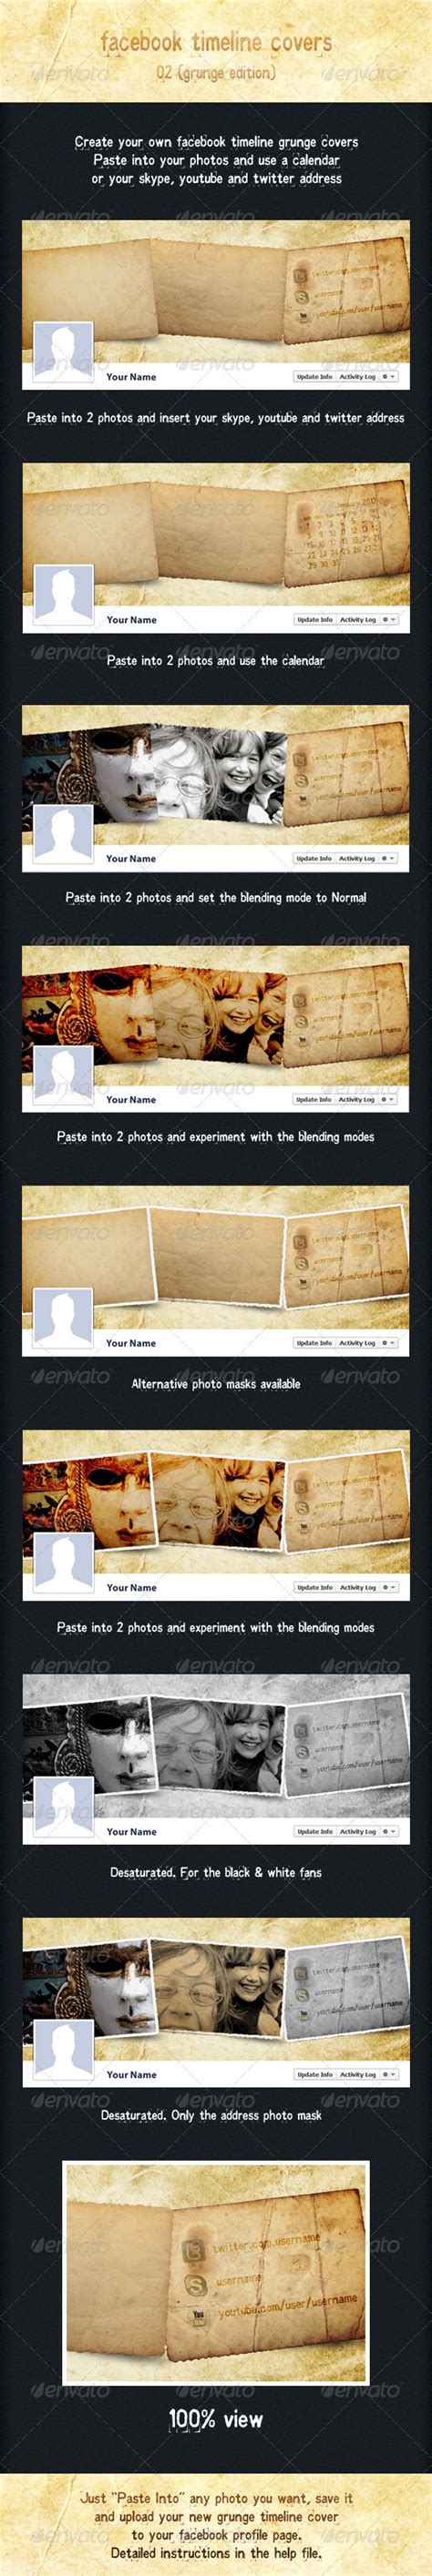 Facebook Timeline Covers Vol2 By Emvalibe Graphicriver